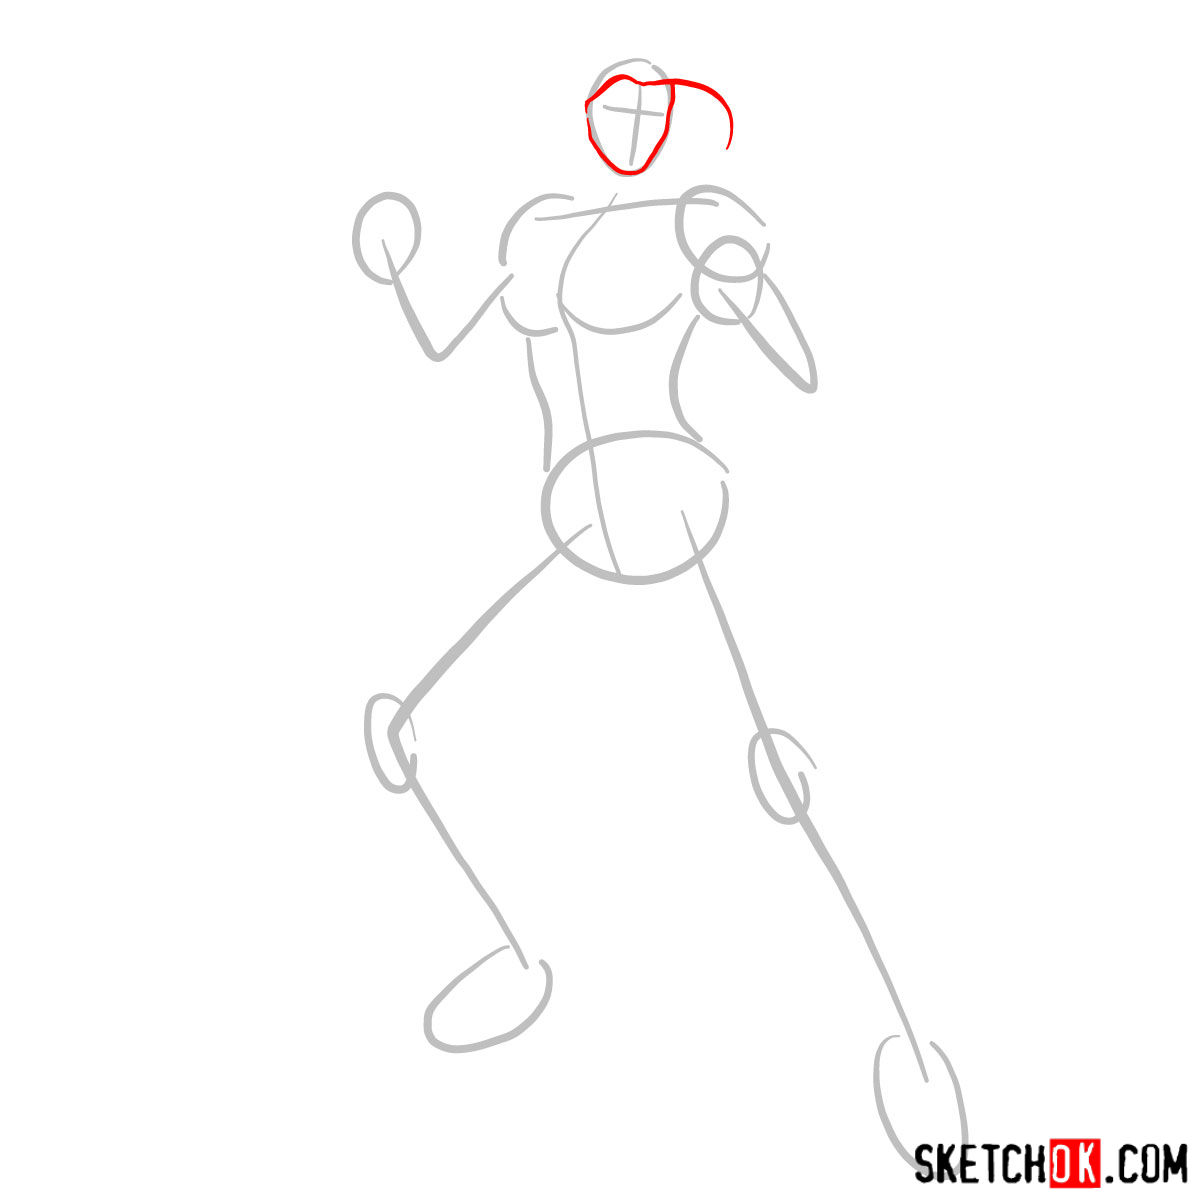 How to draw She-Hulk (Jennifer Walters) from Marvel - step 02